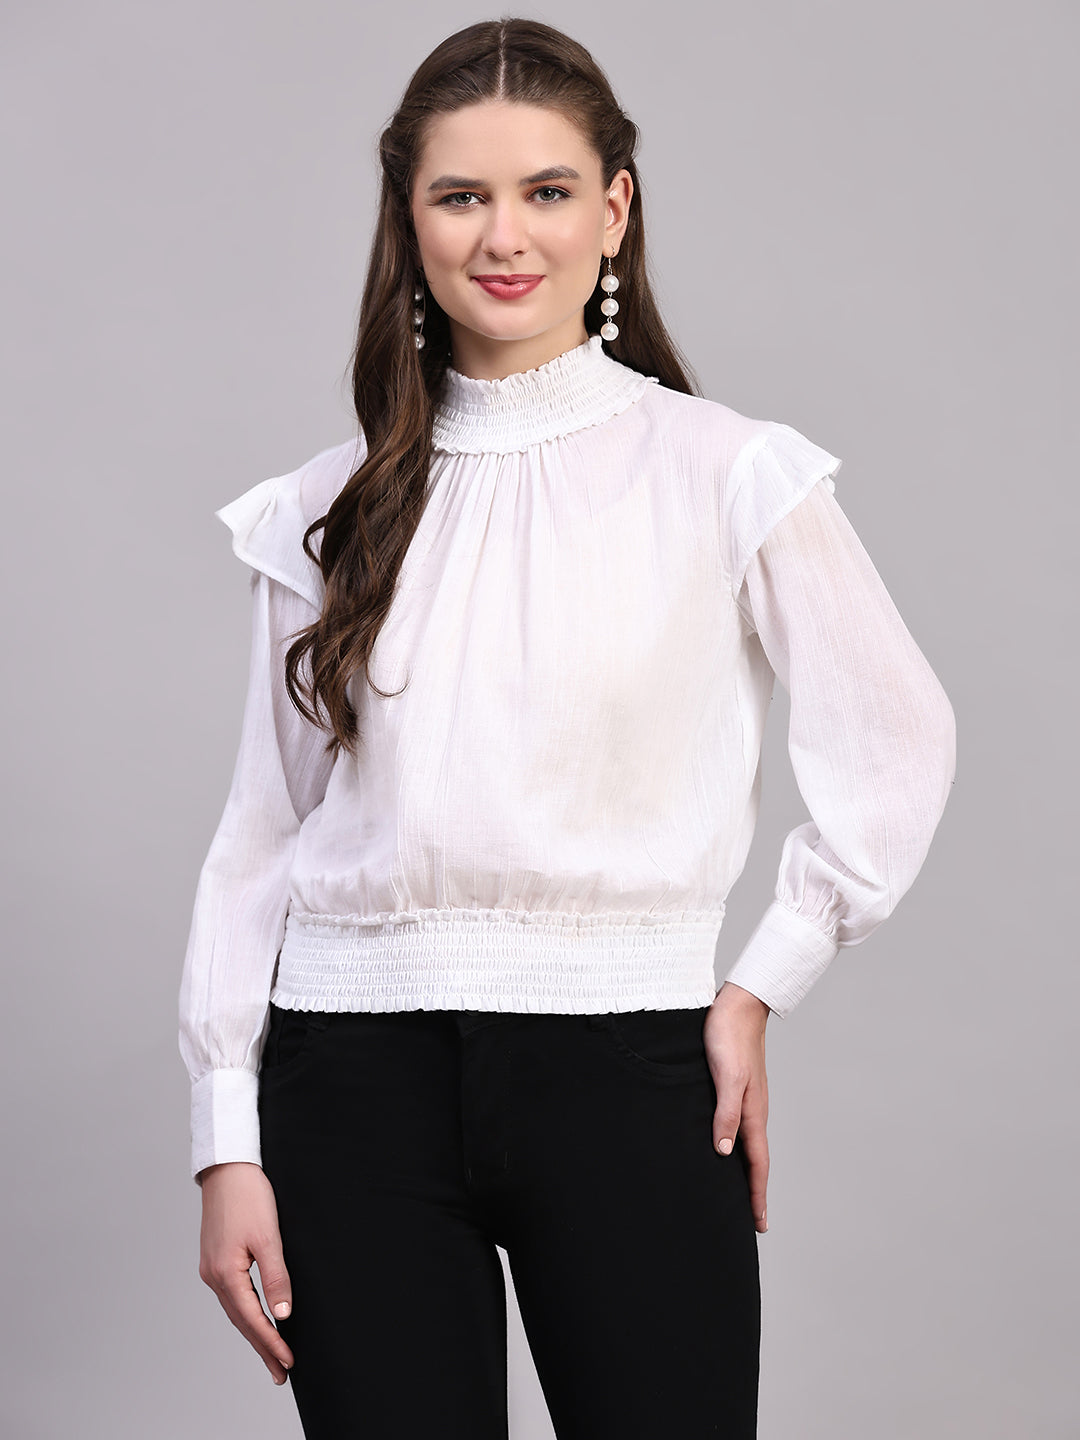 White Solid Casual Smocked Top